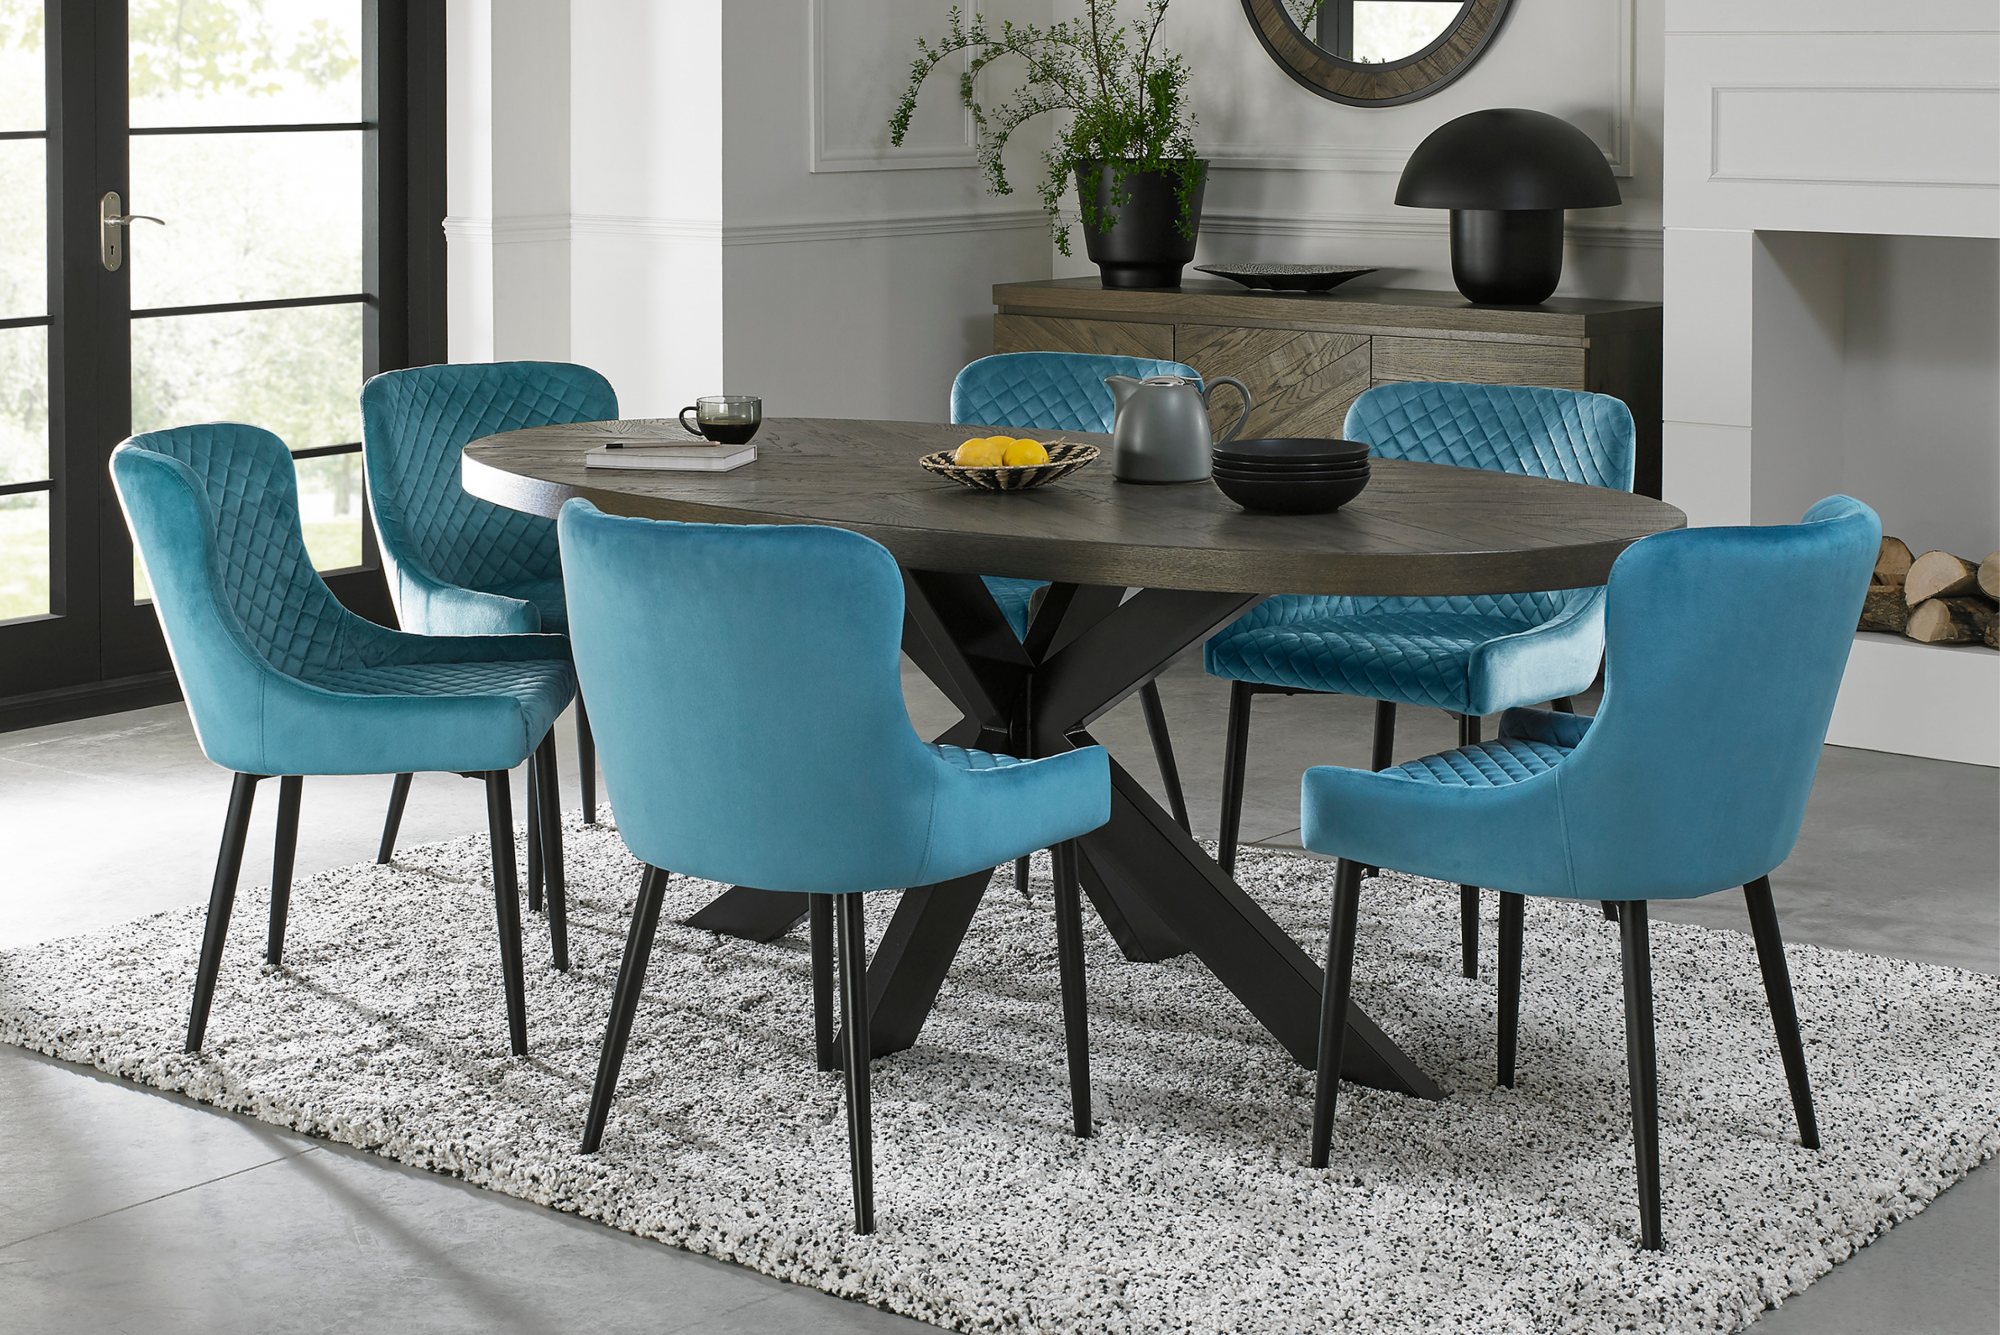 Home Origins Bosco fumed oak 6 seater dining table with 6 Cezanne chairs- petrol blue velvet fabric